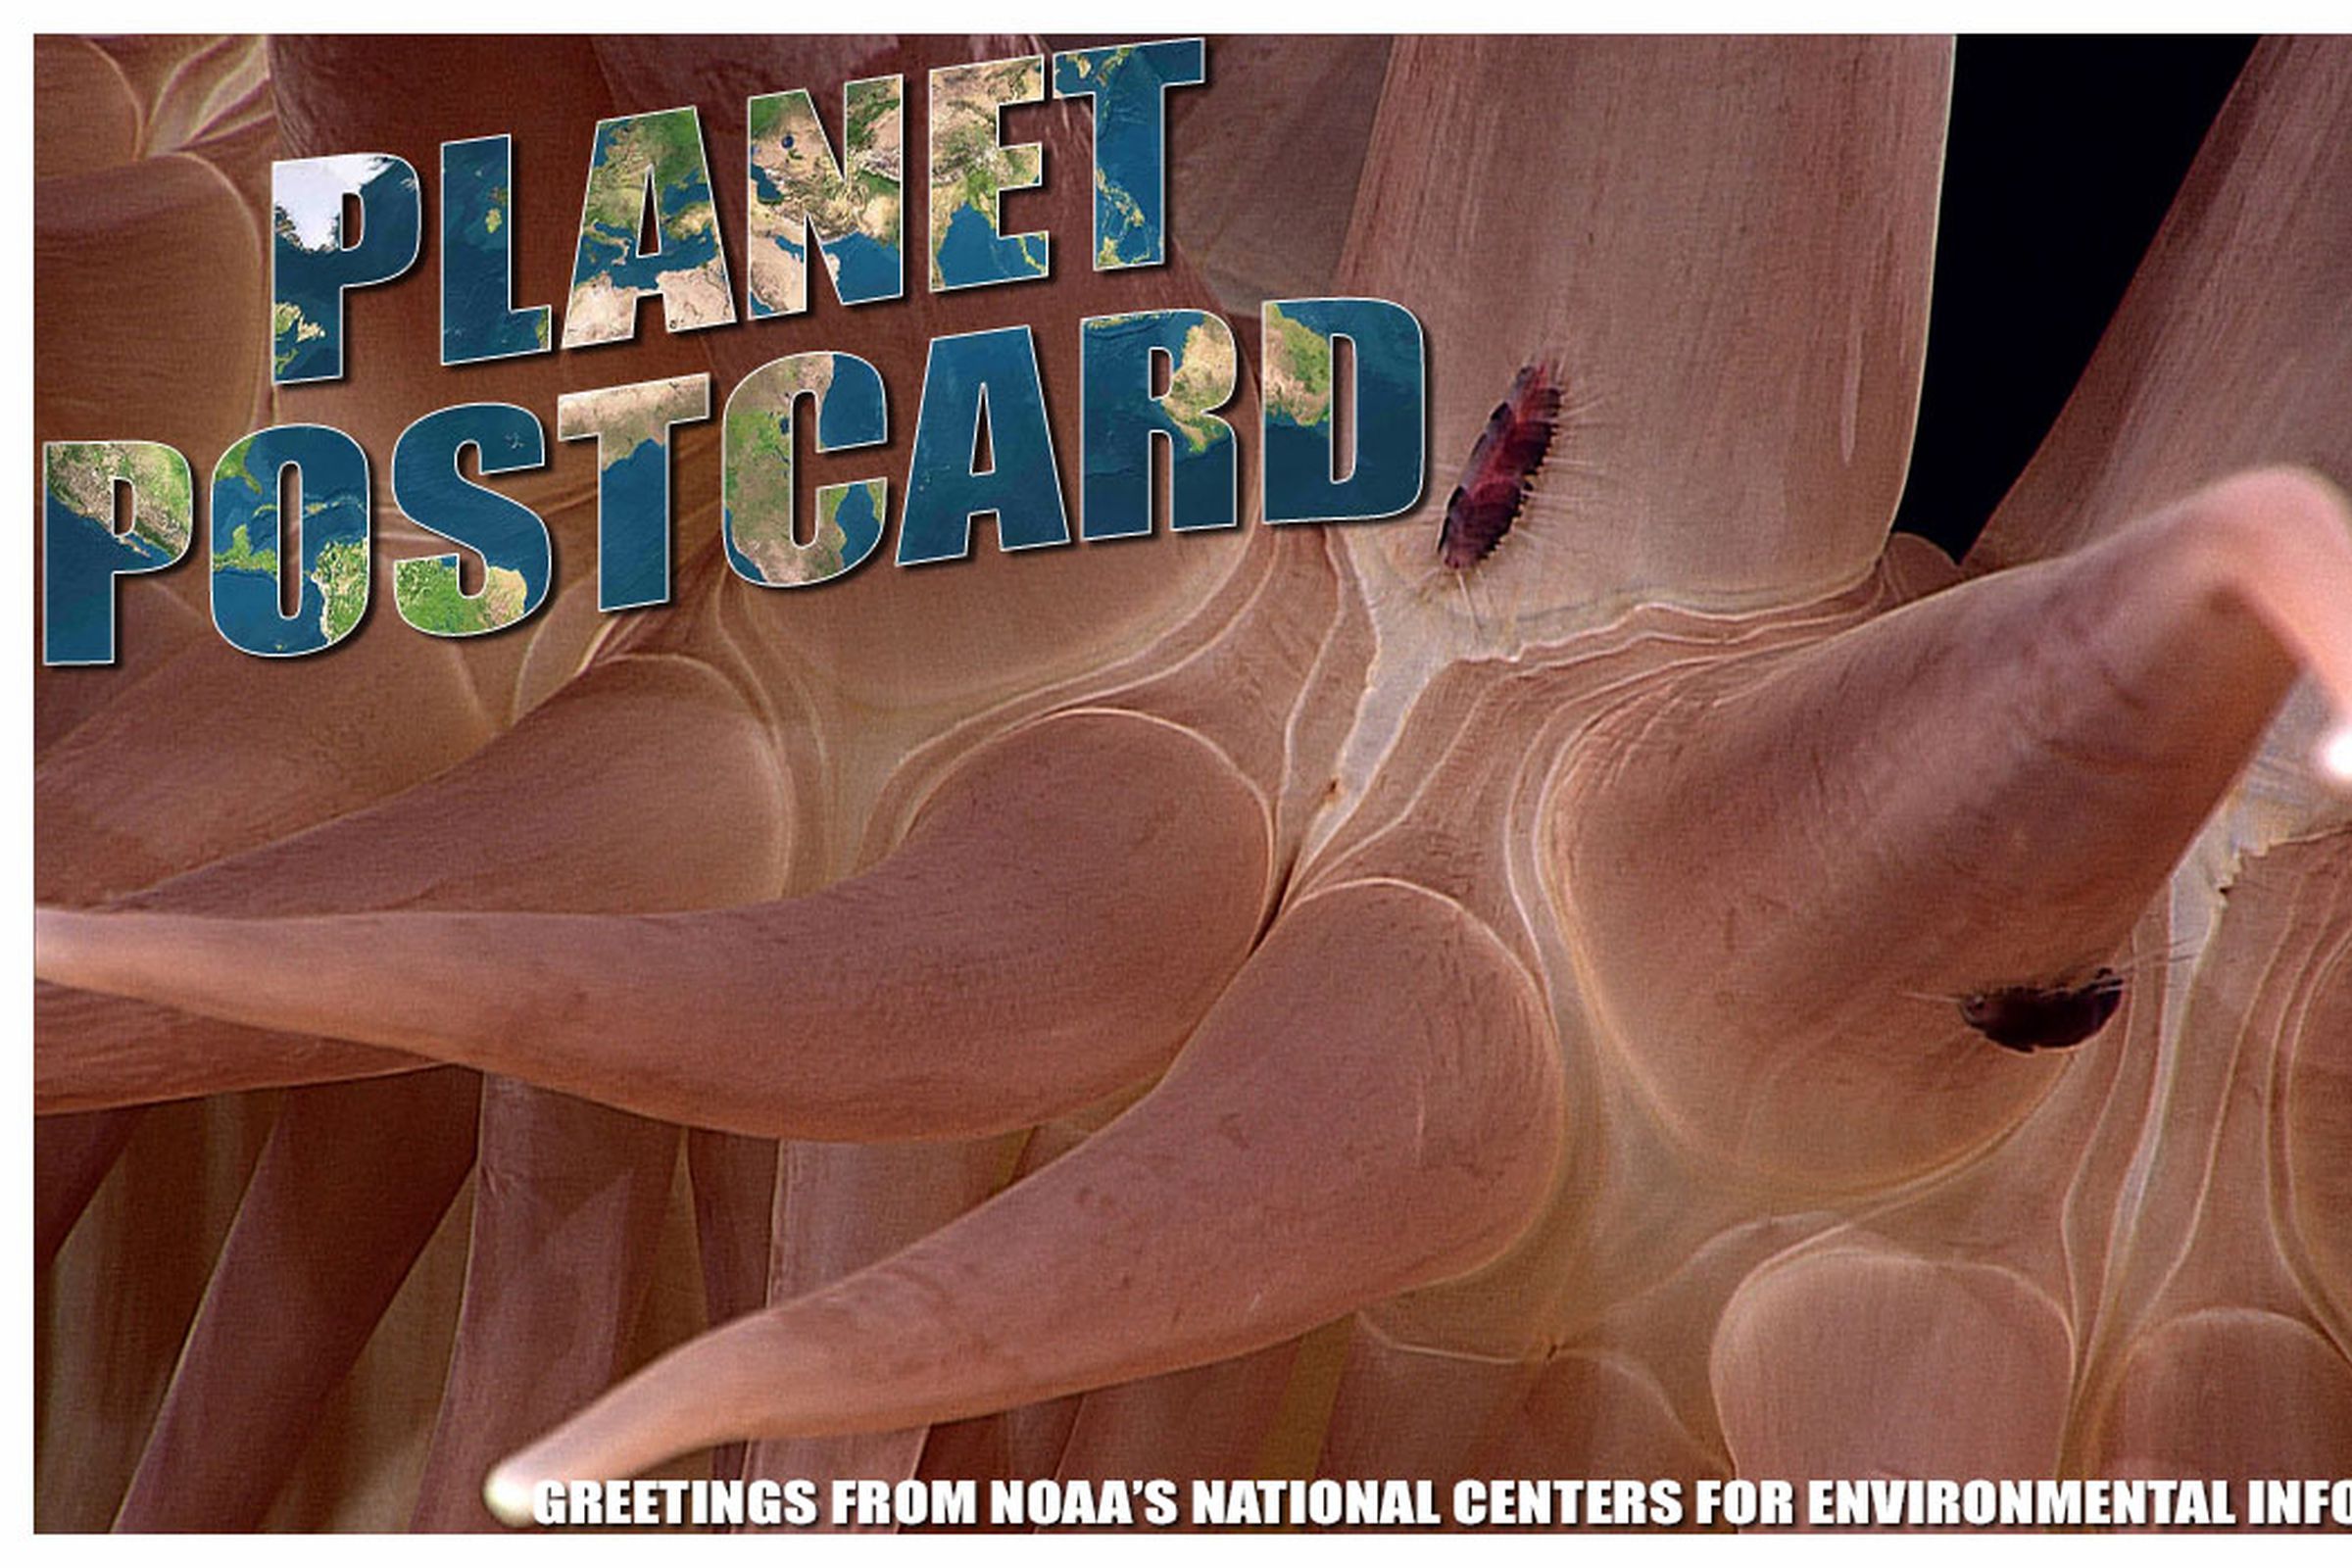 This week’s Planet Postcard features an Annelid. Image by the National Centers for Environmental Information.